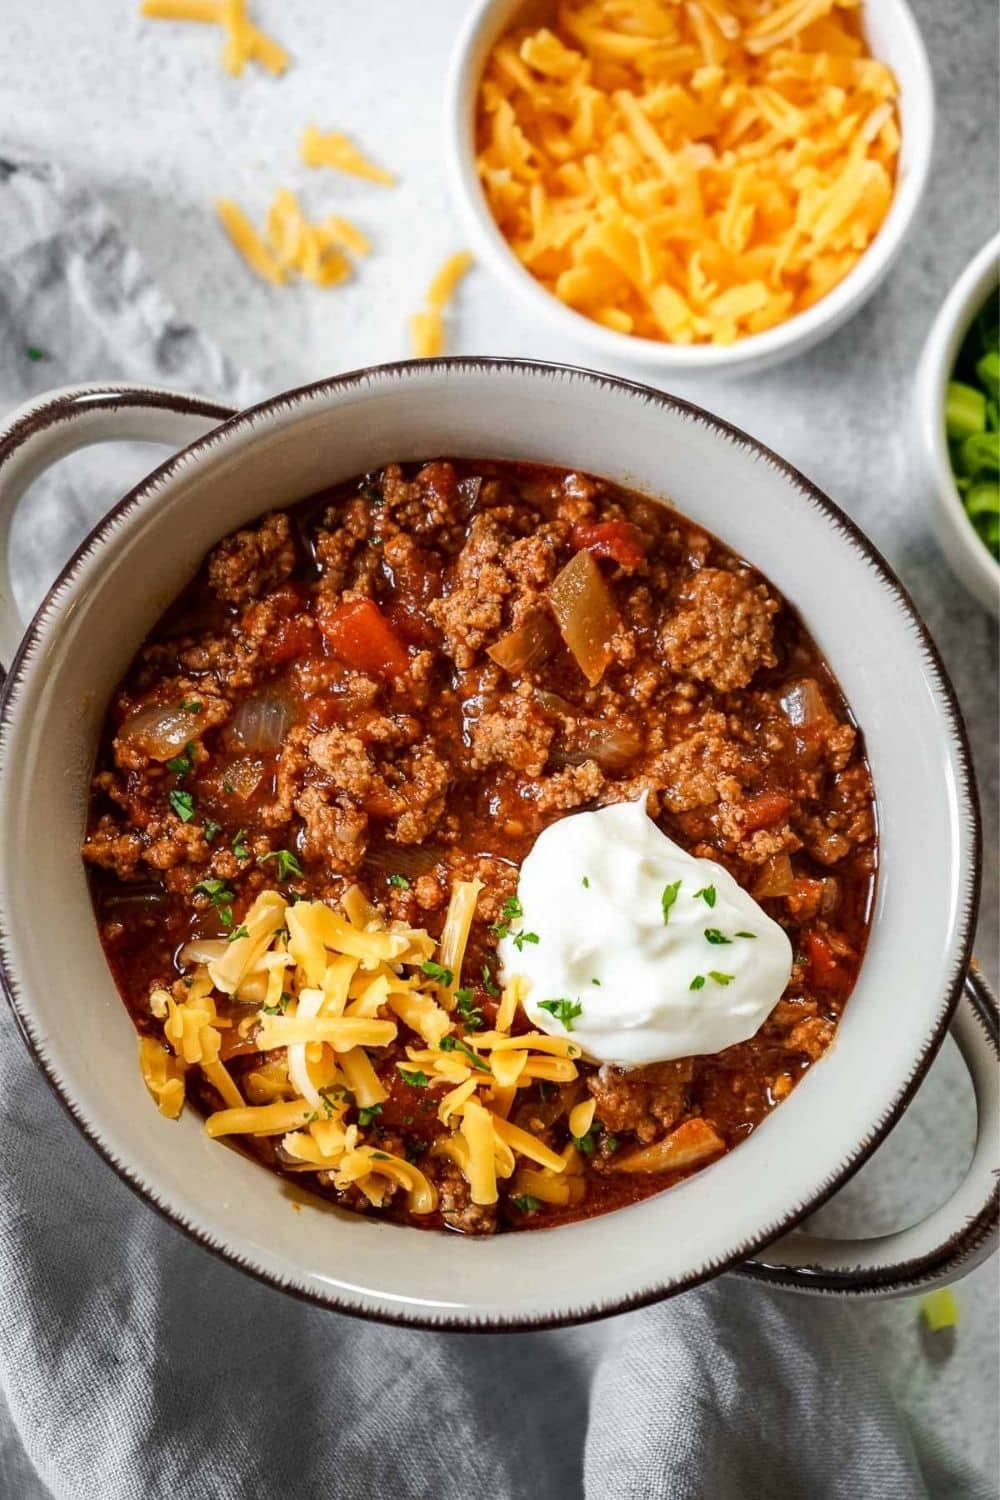 A bowl of chili con carne, which makes a great topping for nachos.